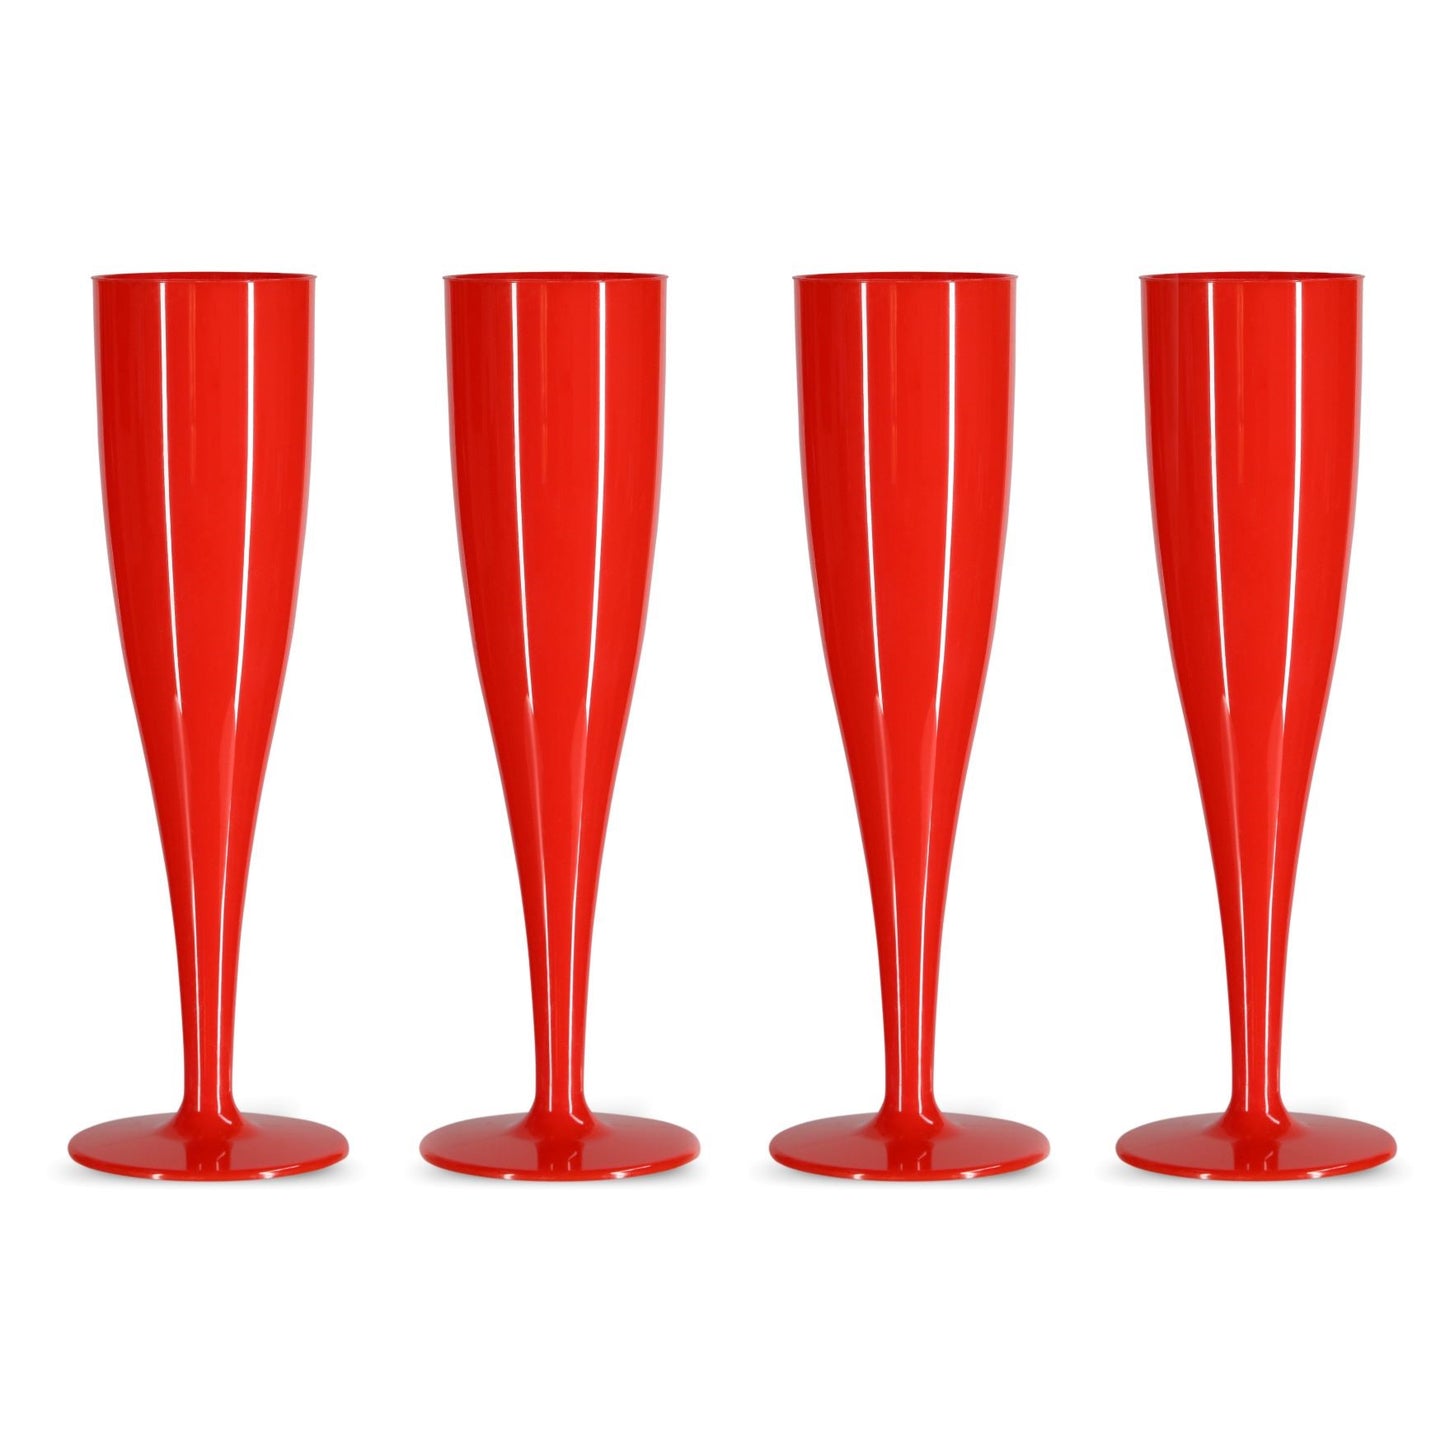 100 x Red Prosecco Flutes – Biodegradable Material in glossy Colour 1-Piece Champagne Glass (Pack of 100 Glasses) Halloween, Parties, BBQ-5056020187349-EY-PP-168-Product Pro-BBQ, Biodegradable, Champagne Flutes, Champagne Glasses, Flutes, Garden, Picnic, Prosecco Flutes, Prosecco Glasses, Red, Red Champagne Glasses, Red Prosecco Flutes, Wedding